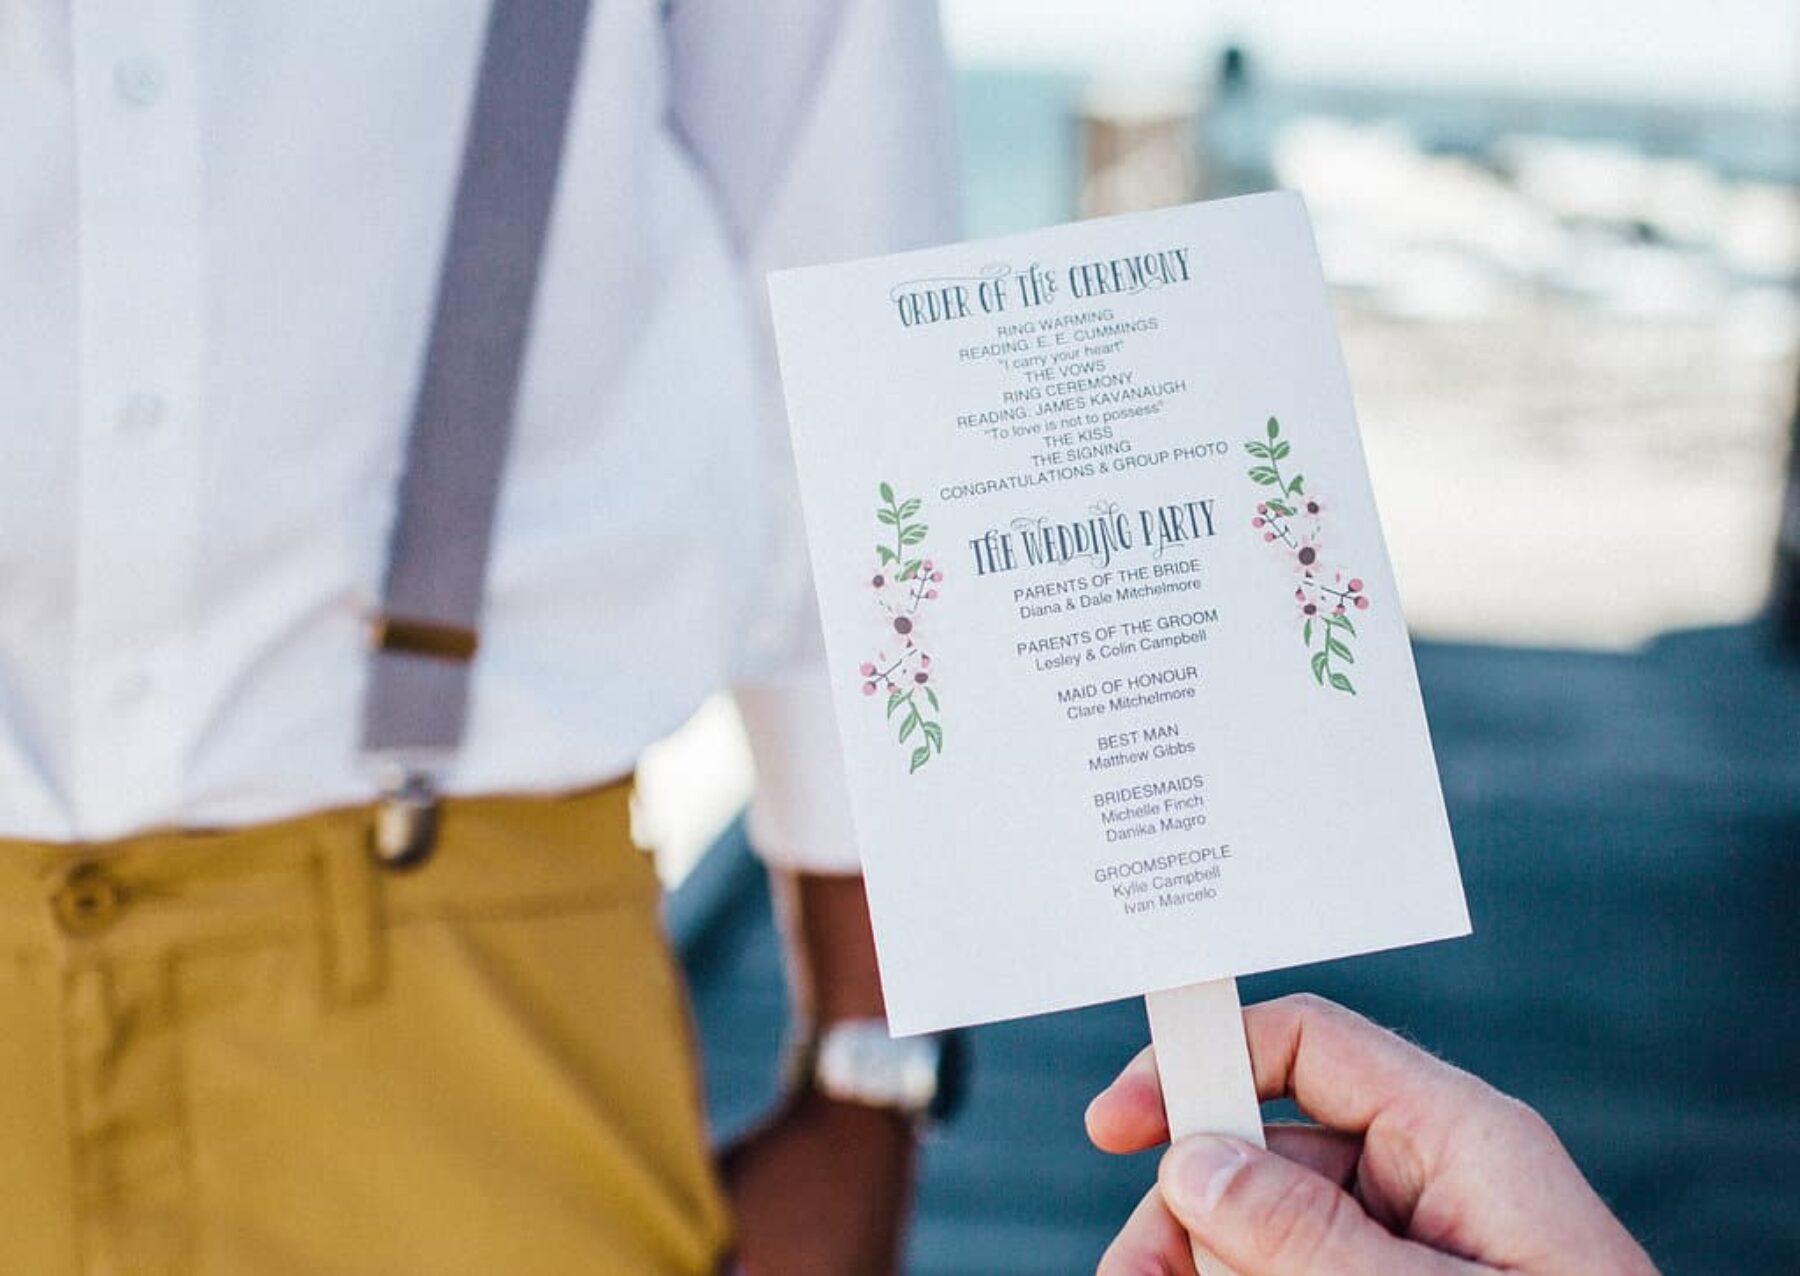 Fremantle Beach wedding | Photography by Fiona Vail